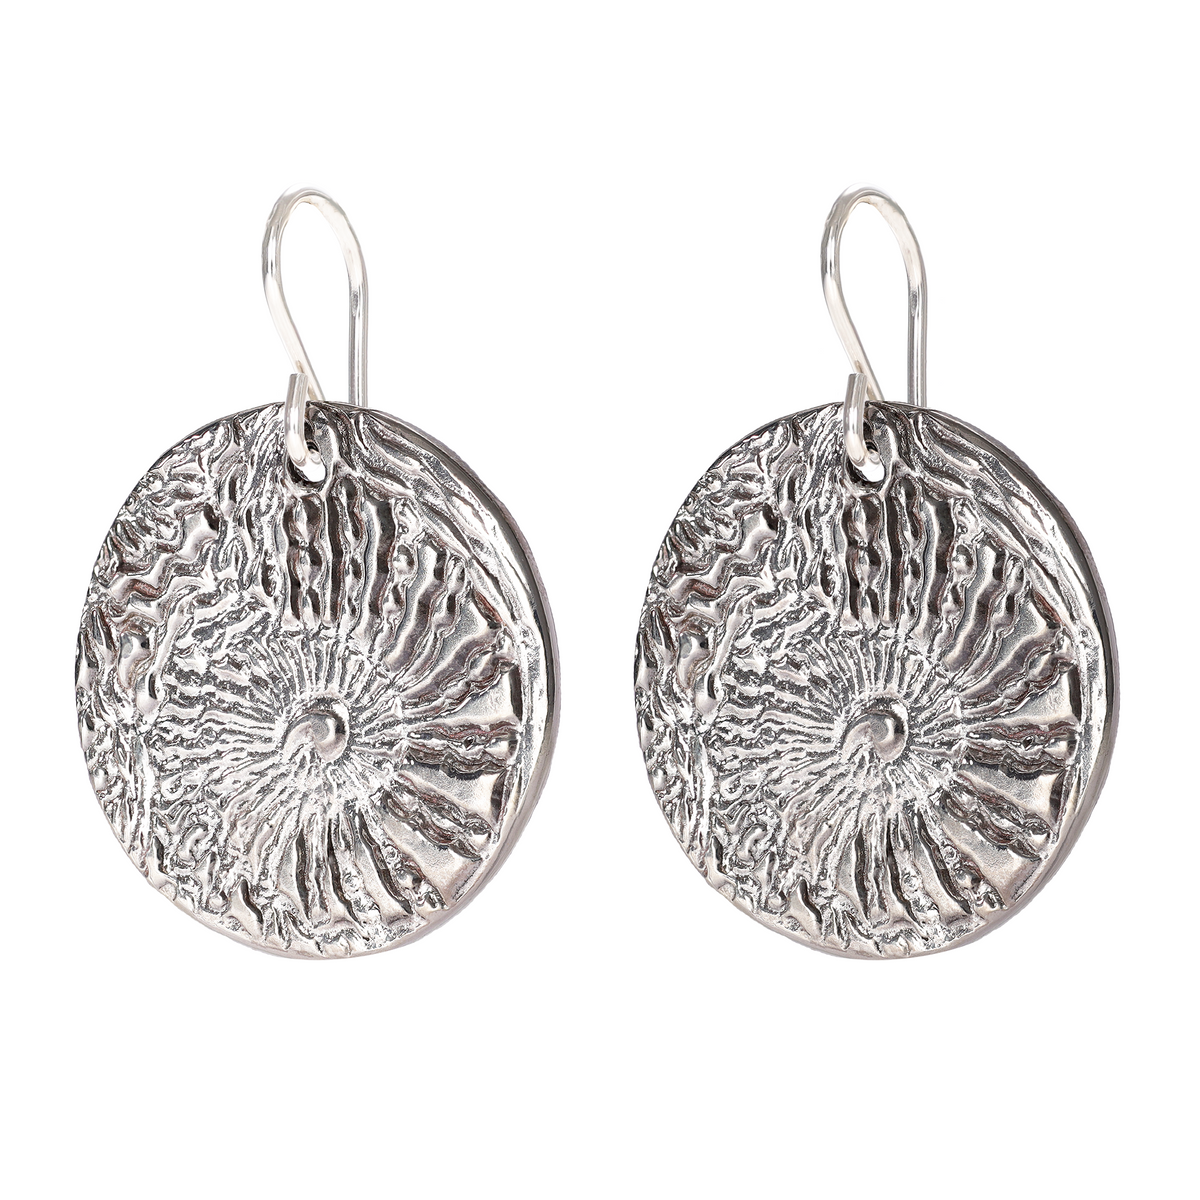 Nautilus Textured Large Sterling Silver Earrings on Short Ear Wires